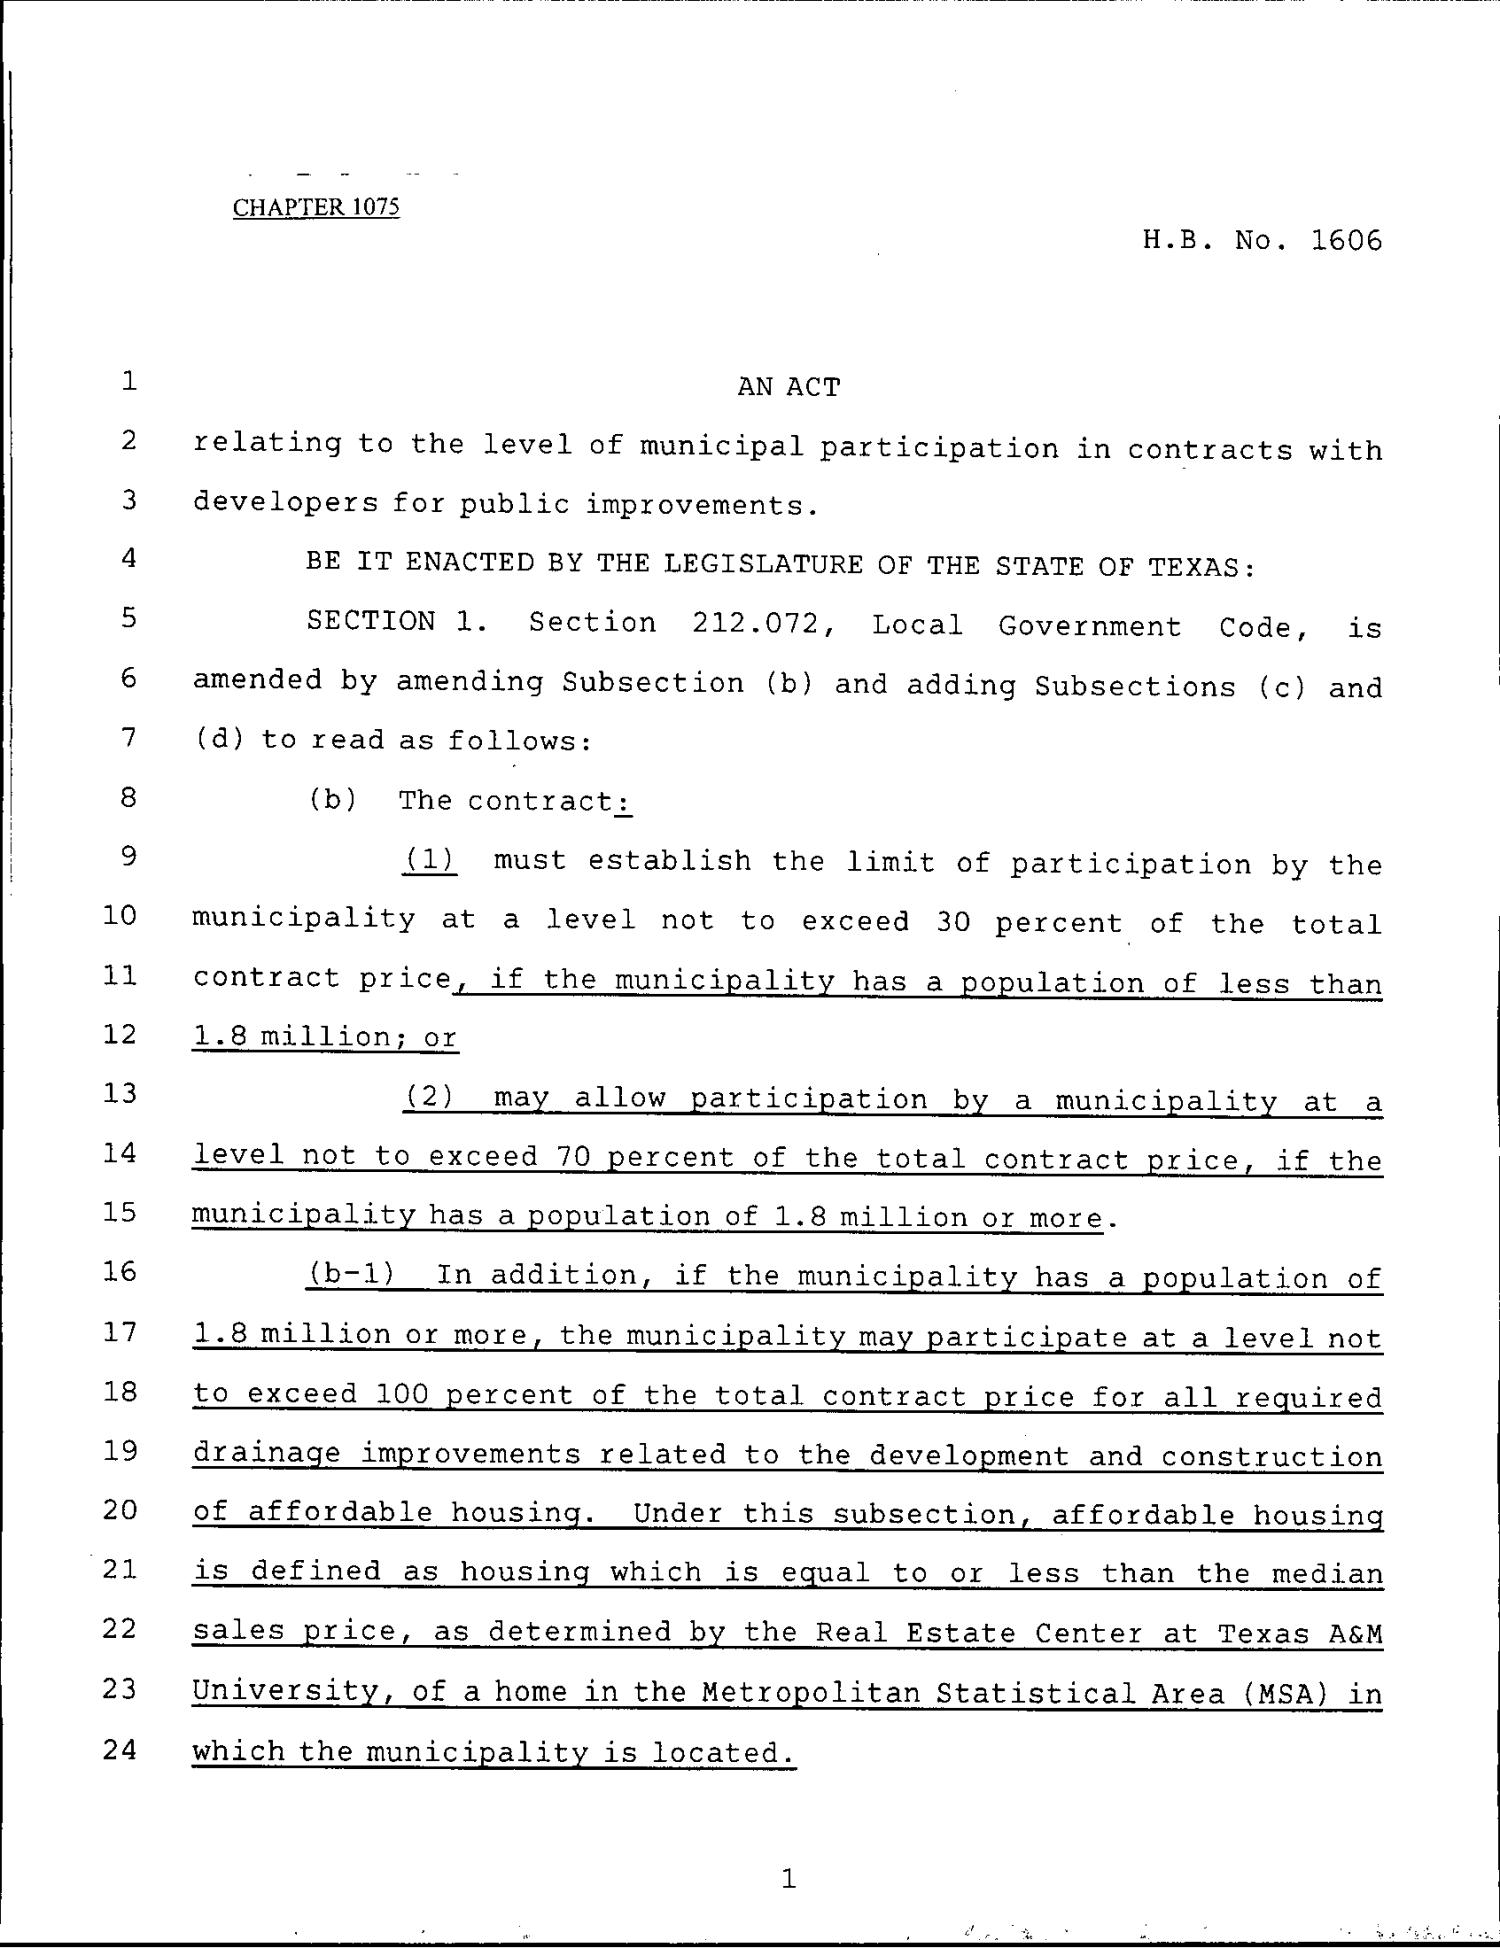 79th Texas Legislature, Regular Session, House Bill 1606, Chapter 1075
                                                
                                                    [Sequence #]: 1 of 3
                                                